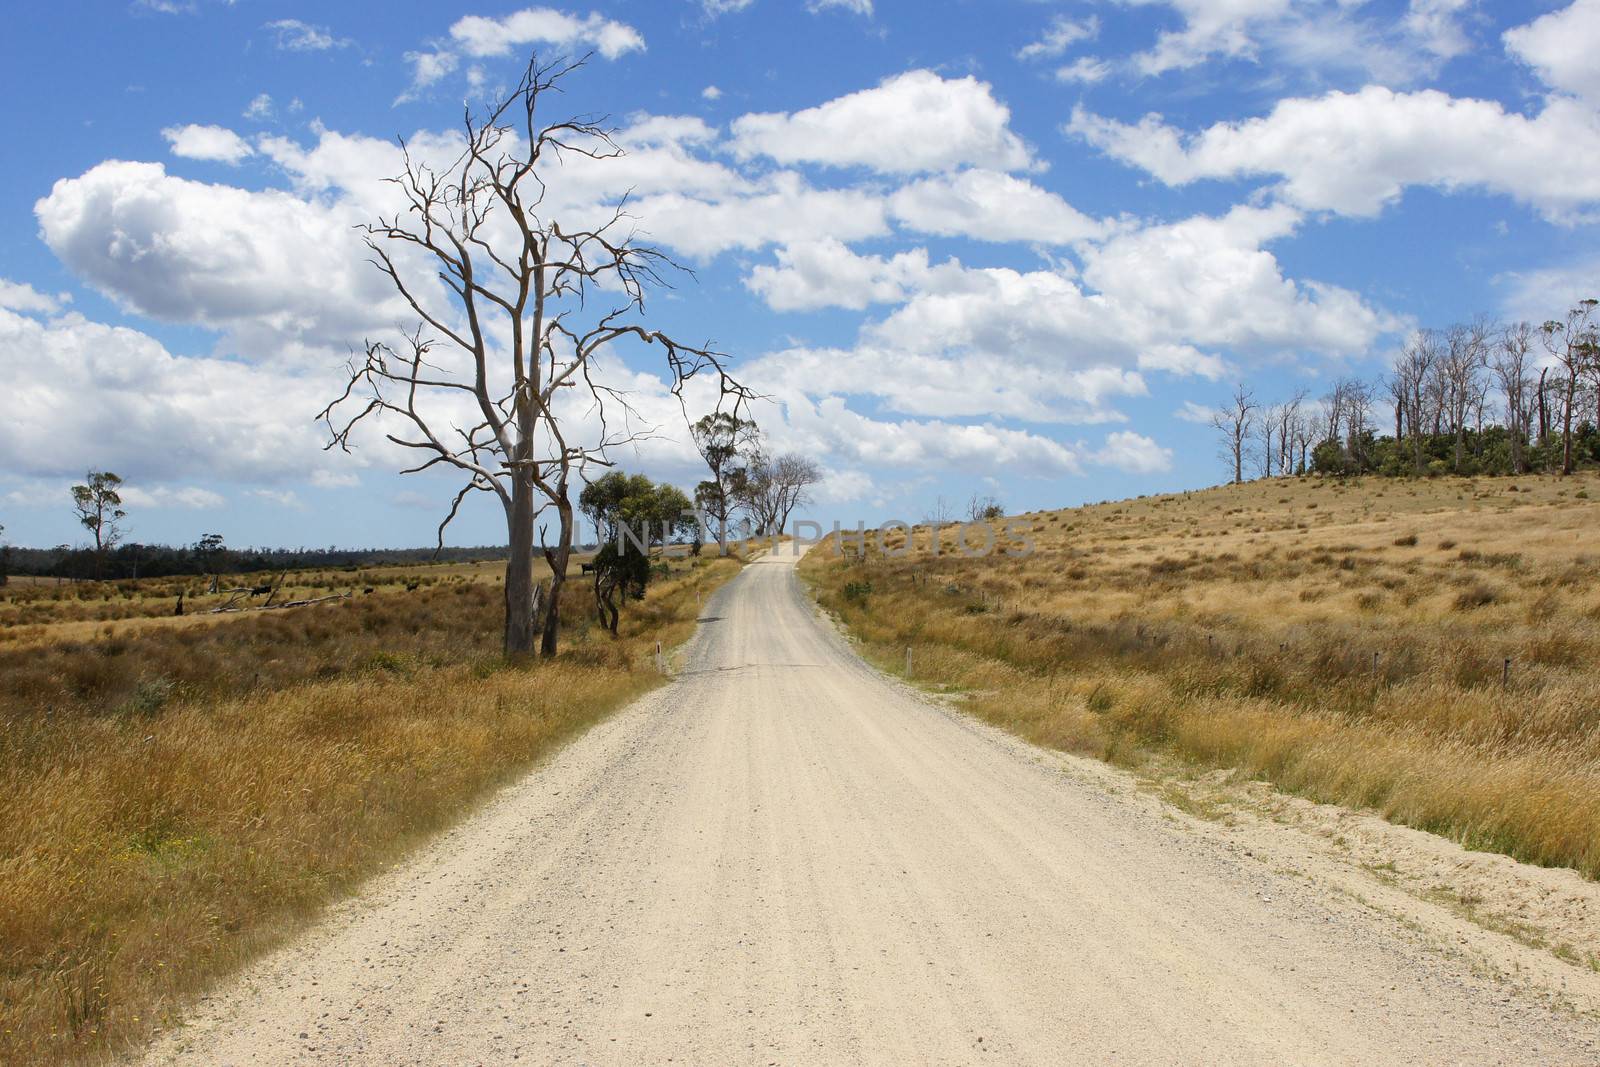 Typical dirt road in the north of Tasmania, Australia